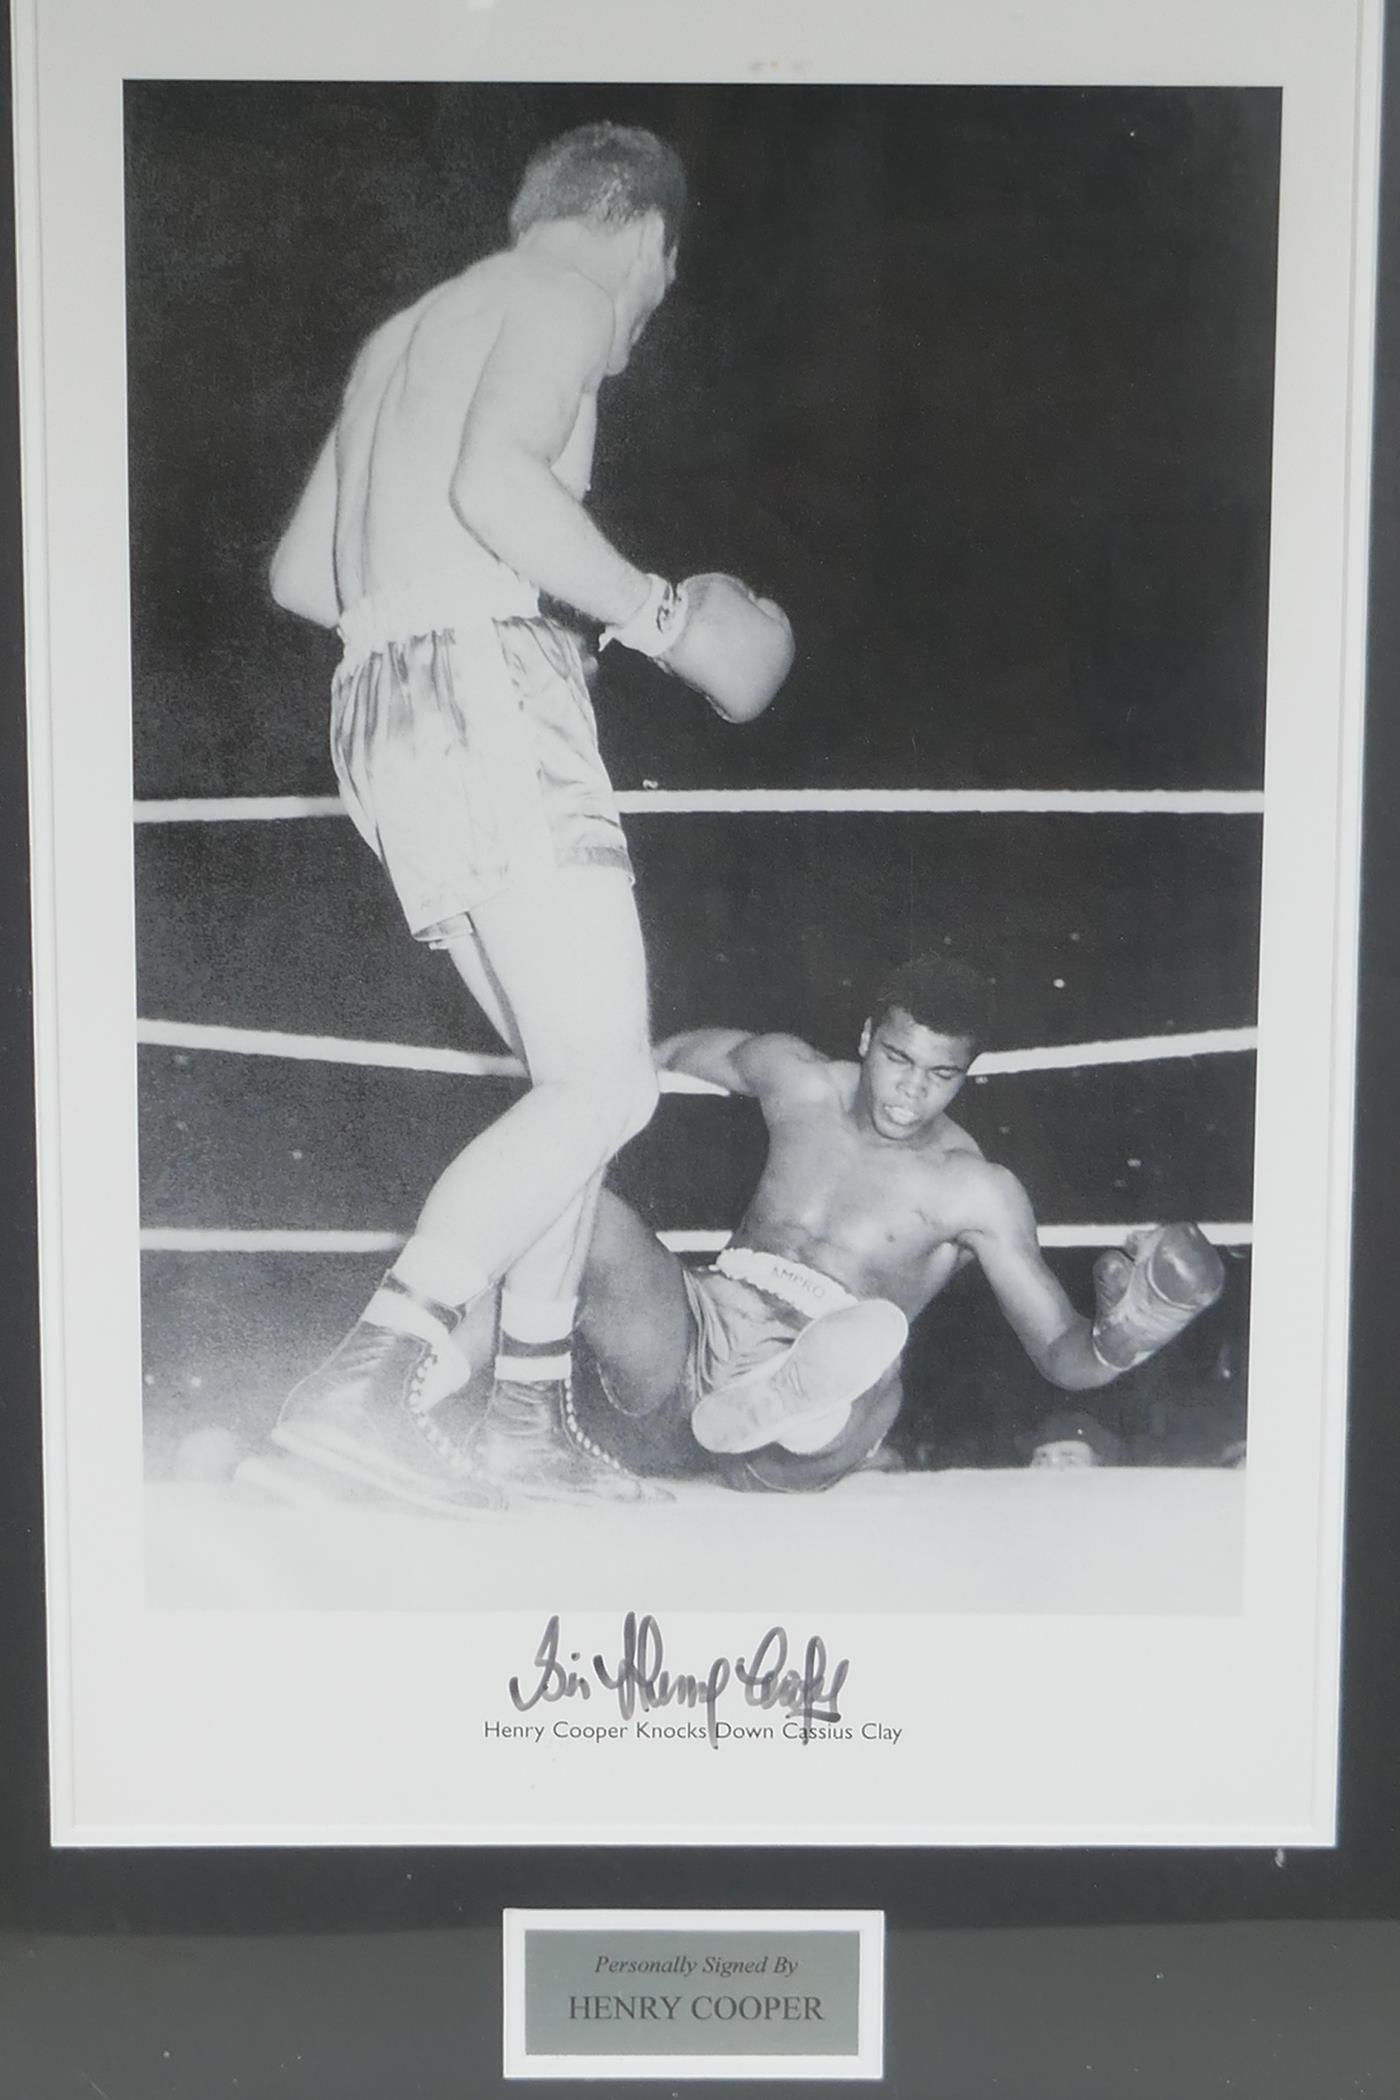 A framed signed photographic print of Henry Cooper knocking down Cassius Clay (Mohammed Ali) with - Image 2 of 5